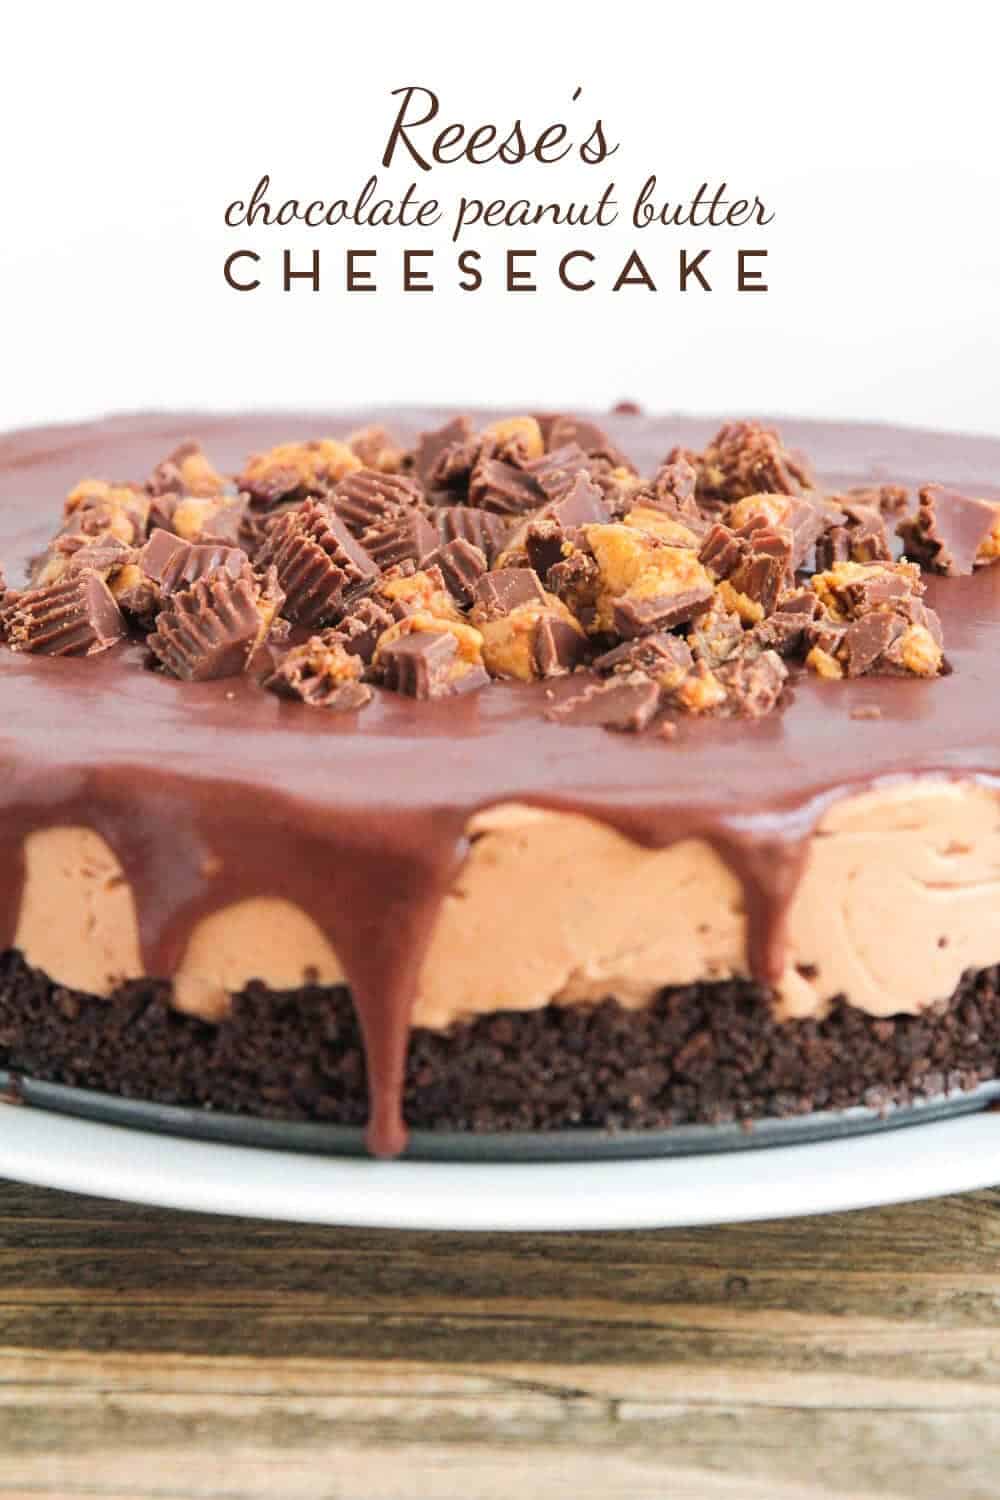 Reese's No Bake Chocolate Peanut Butter Cheesecake - I Heart Nap Time